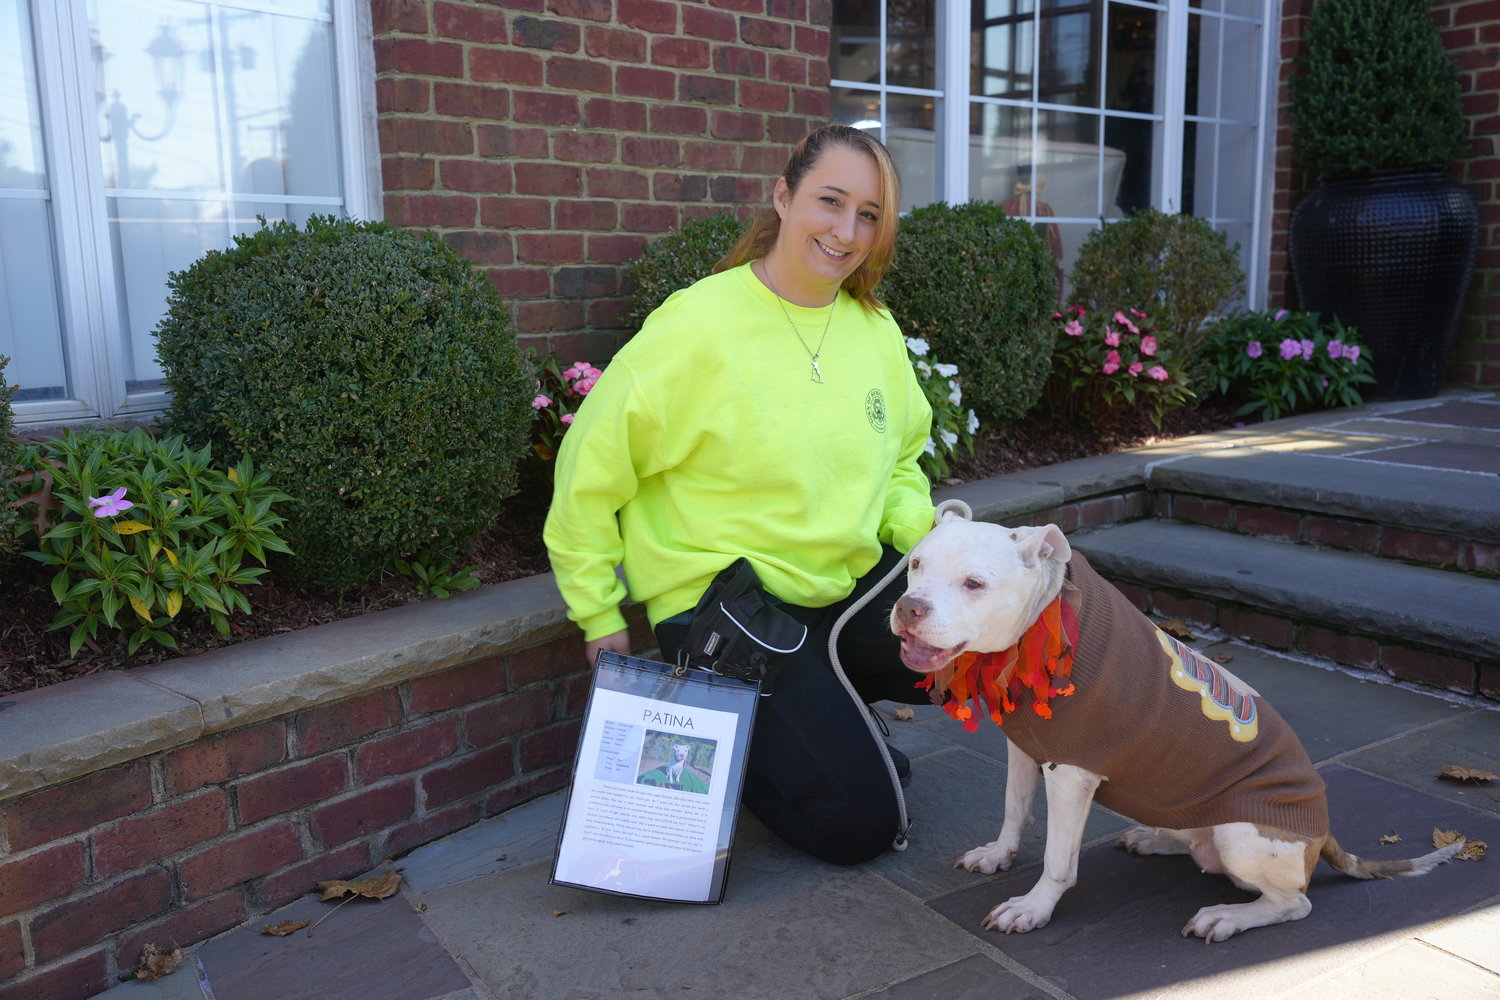 Meghan Raedy, a Town of Hempstead Animal Shelter employee from Hicksville with Patina, one of the shelter dogs.